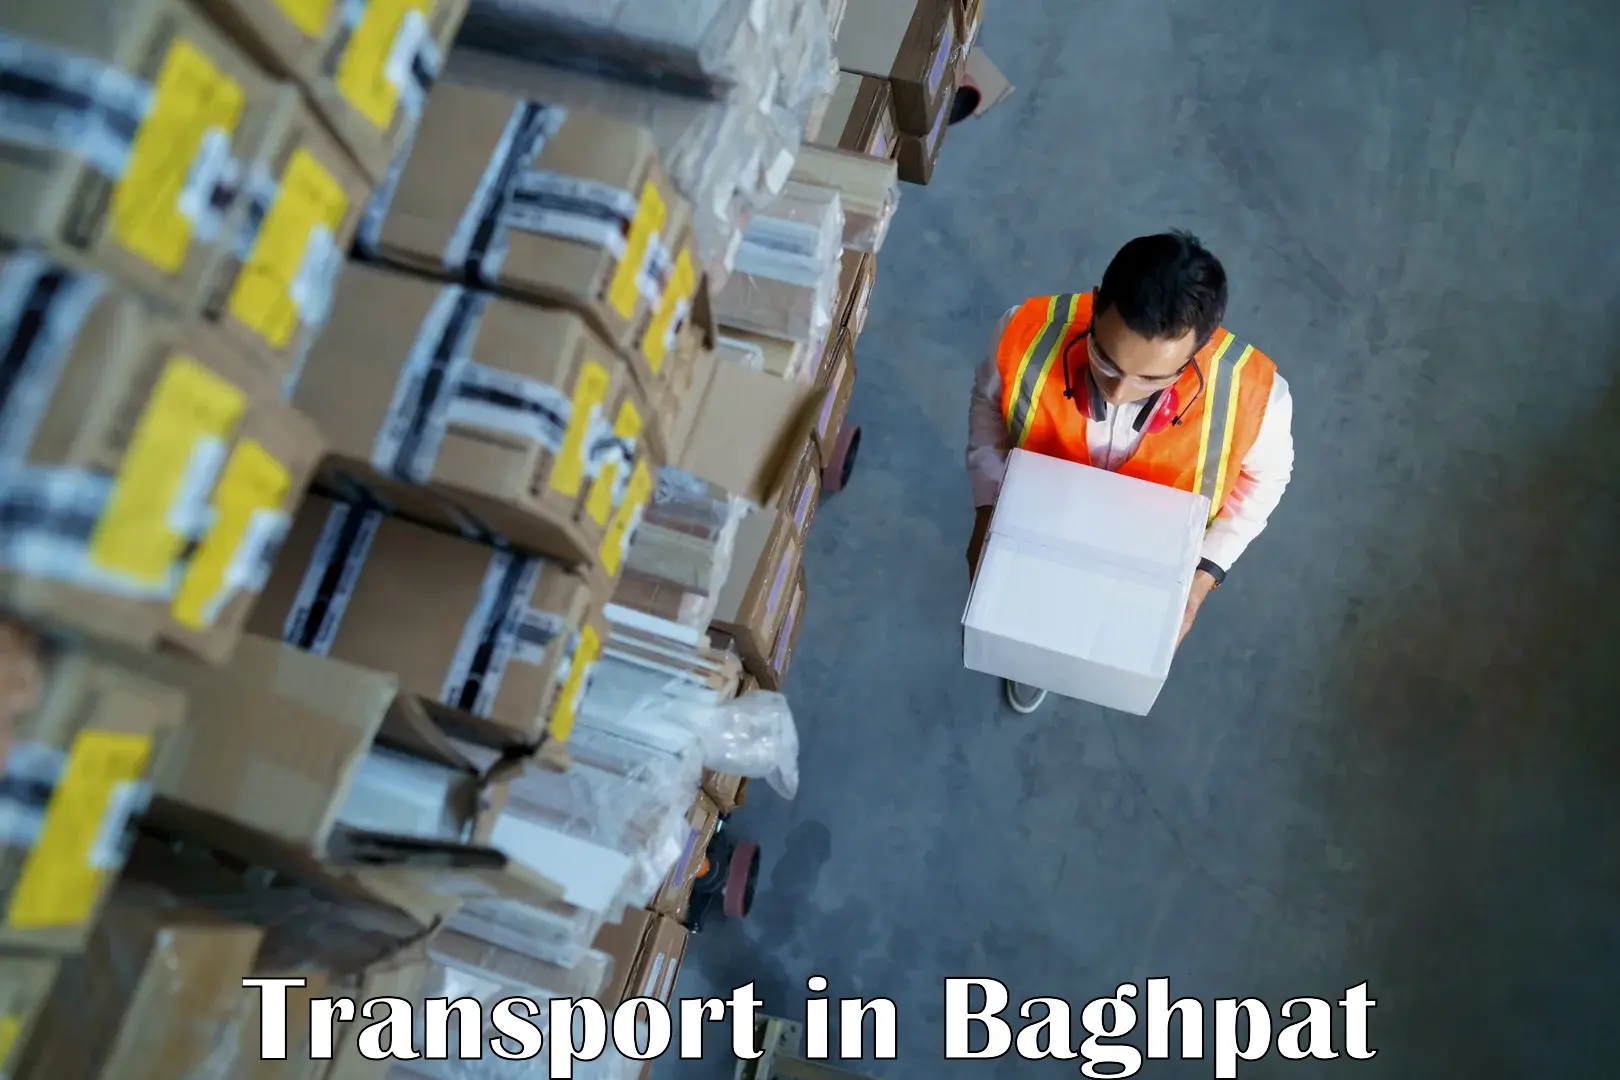 Transportation services in Baghpat